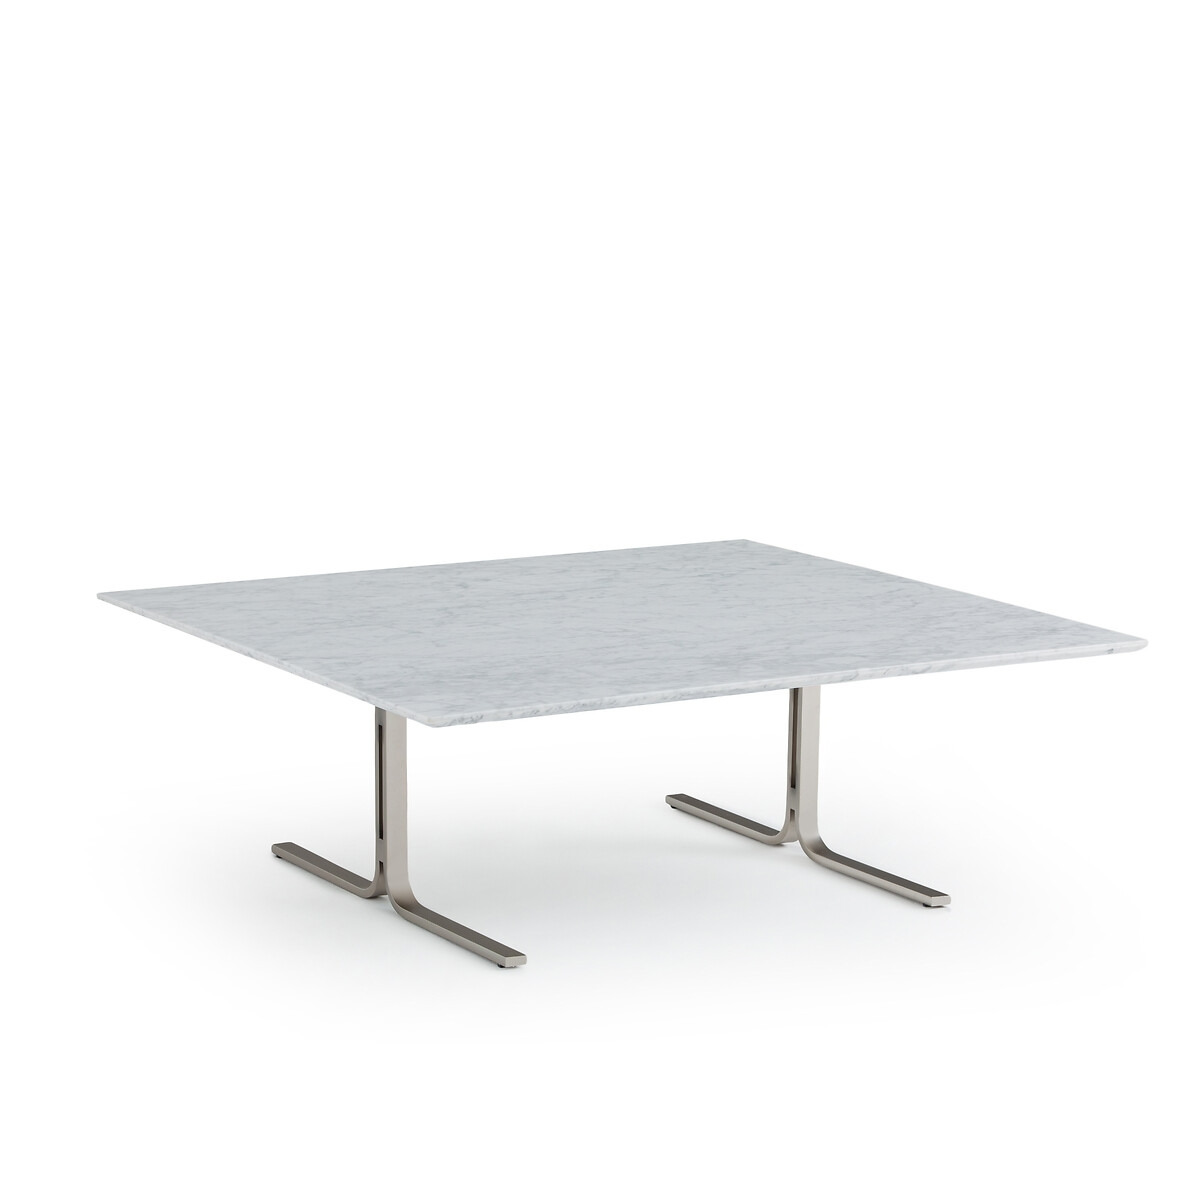 Belno Marble and Metal Square Coffee Table - image 1